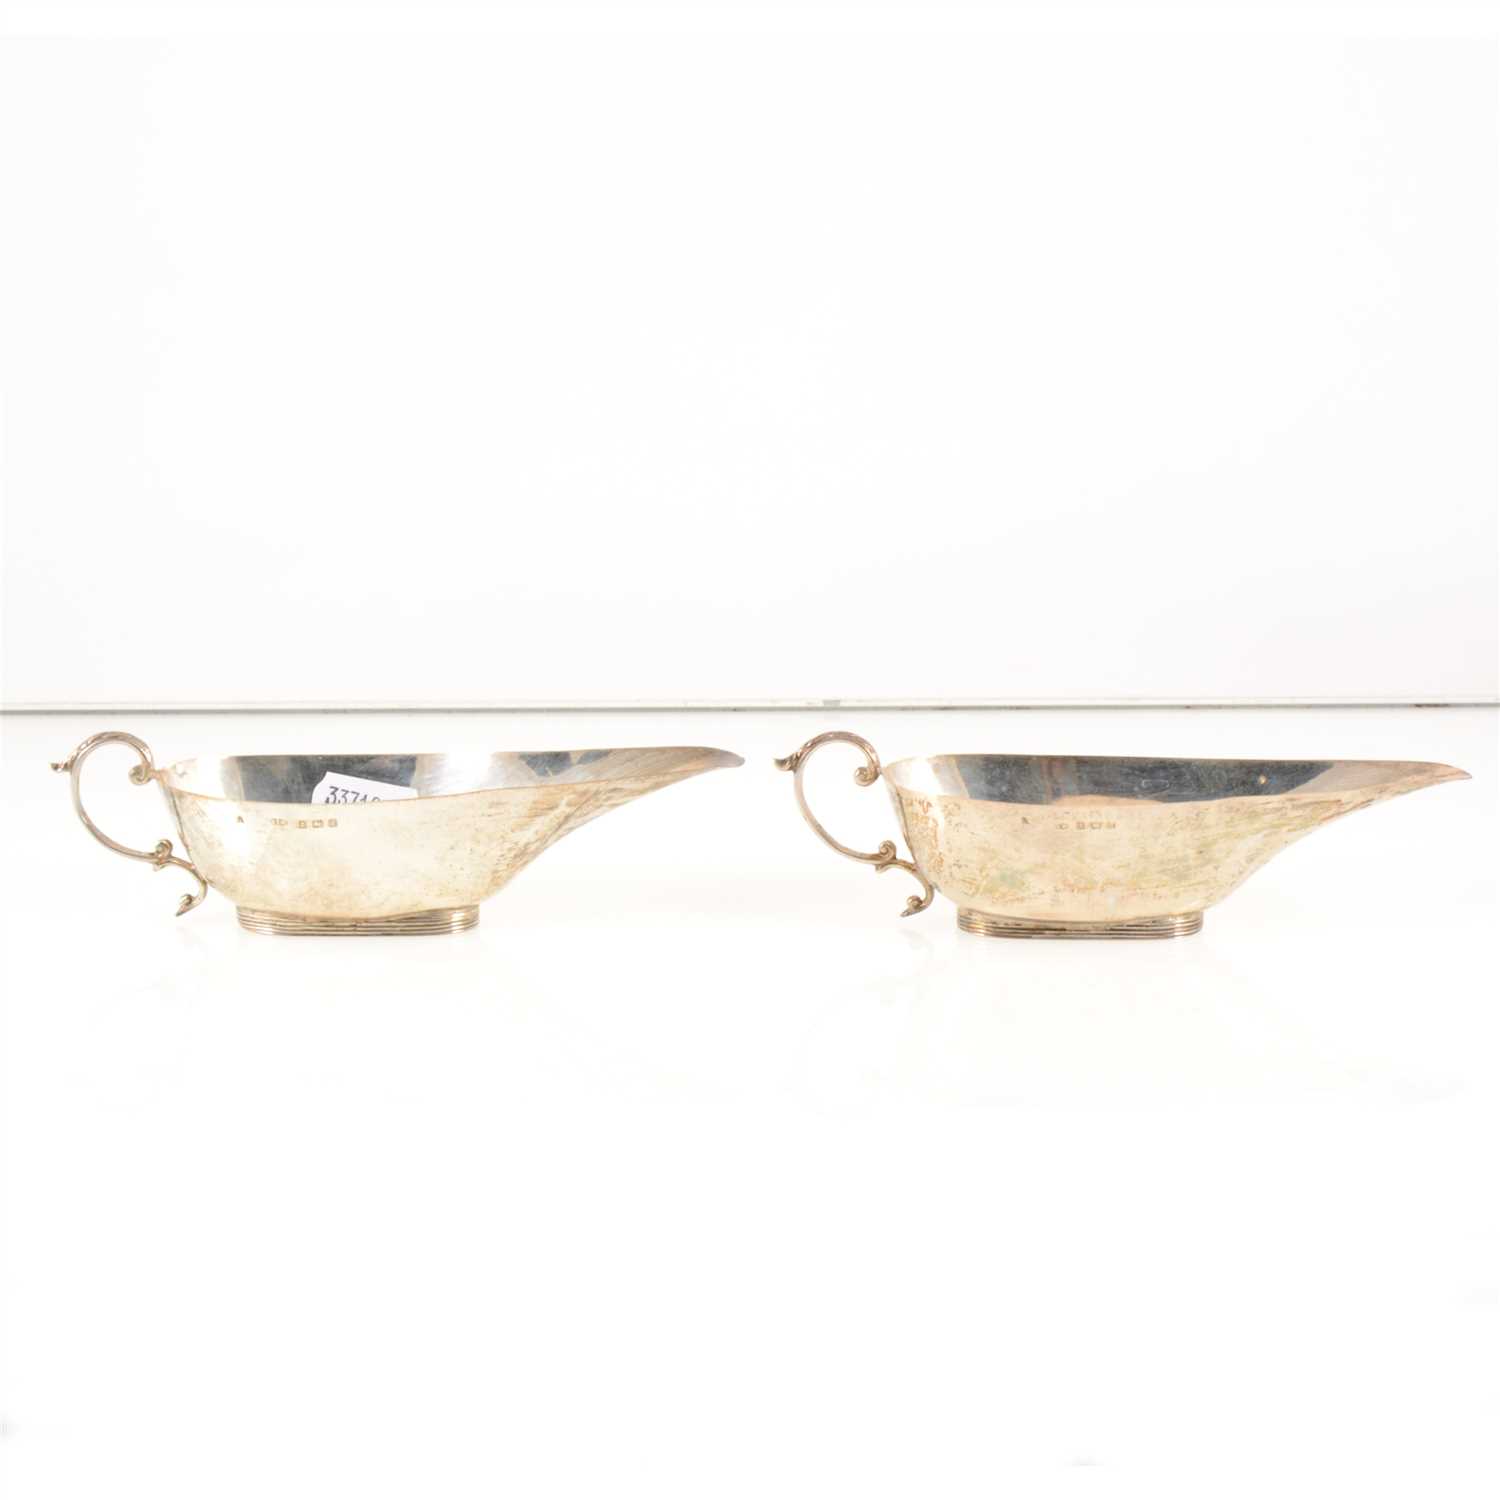 Lot 178 - A pair of small Edwardian silver sauceboats by Henry Matthews, Birmingham 1909, plain oval form with scrolled handles, length 16cm, cased, weight approx. 2.7oz.